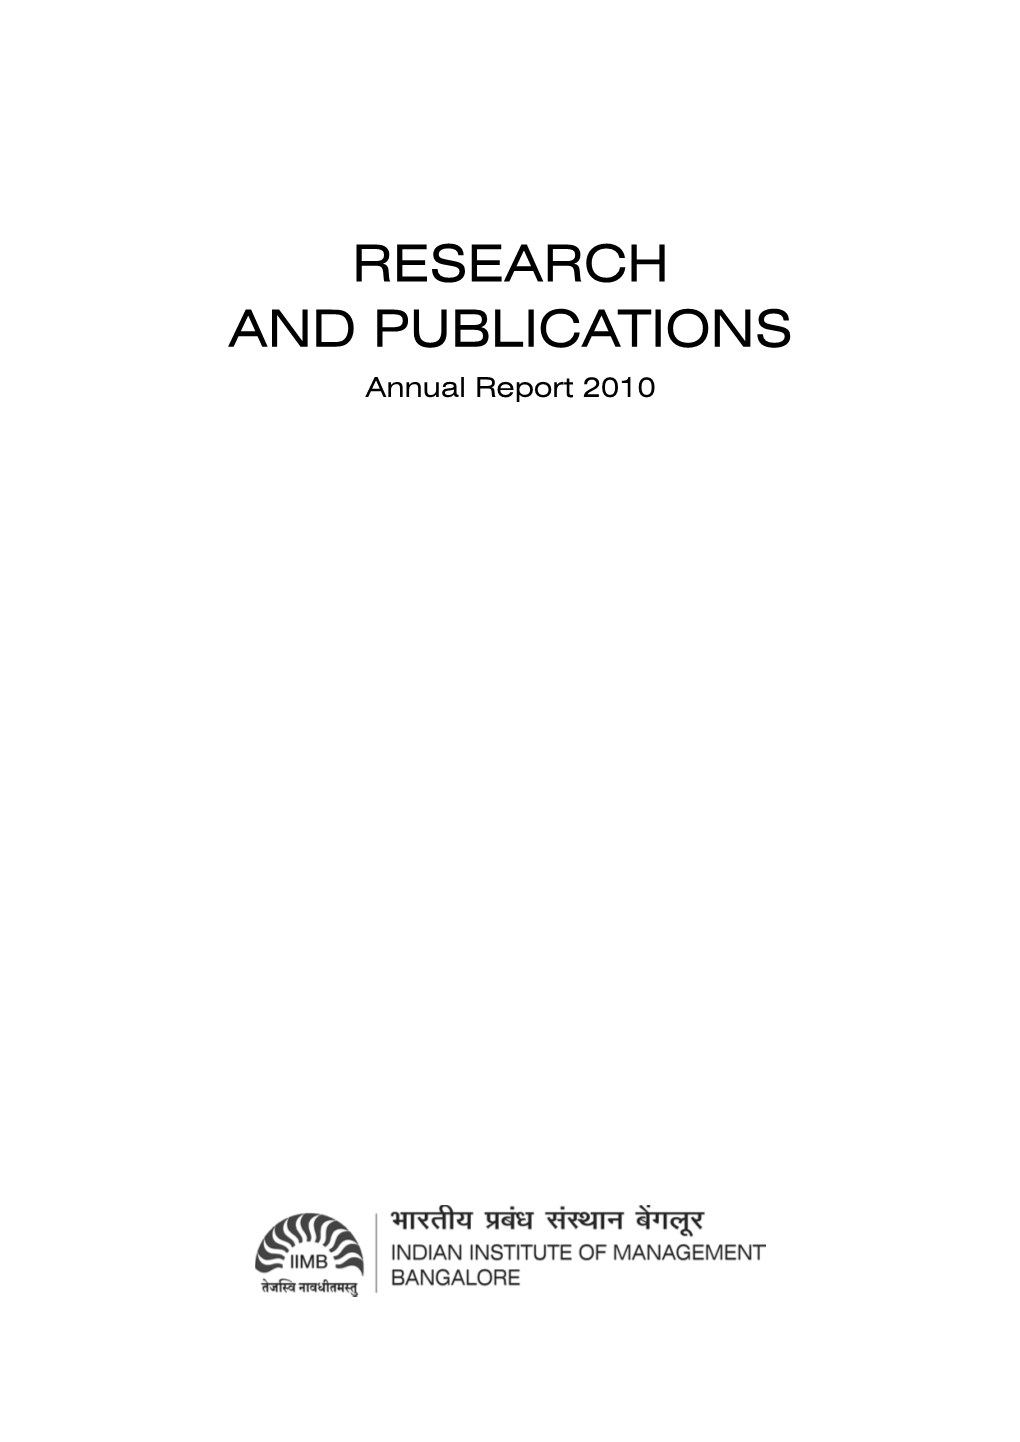 RESEARCH and PUBLICATIONS Annual Report 2010